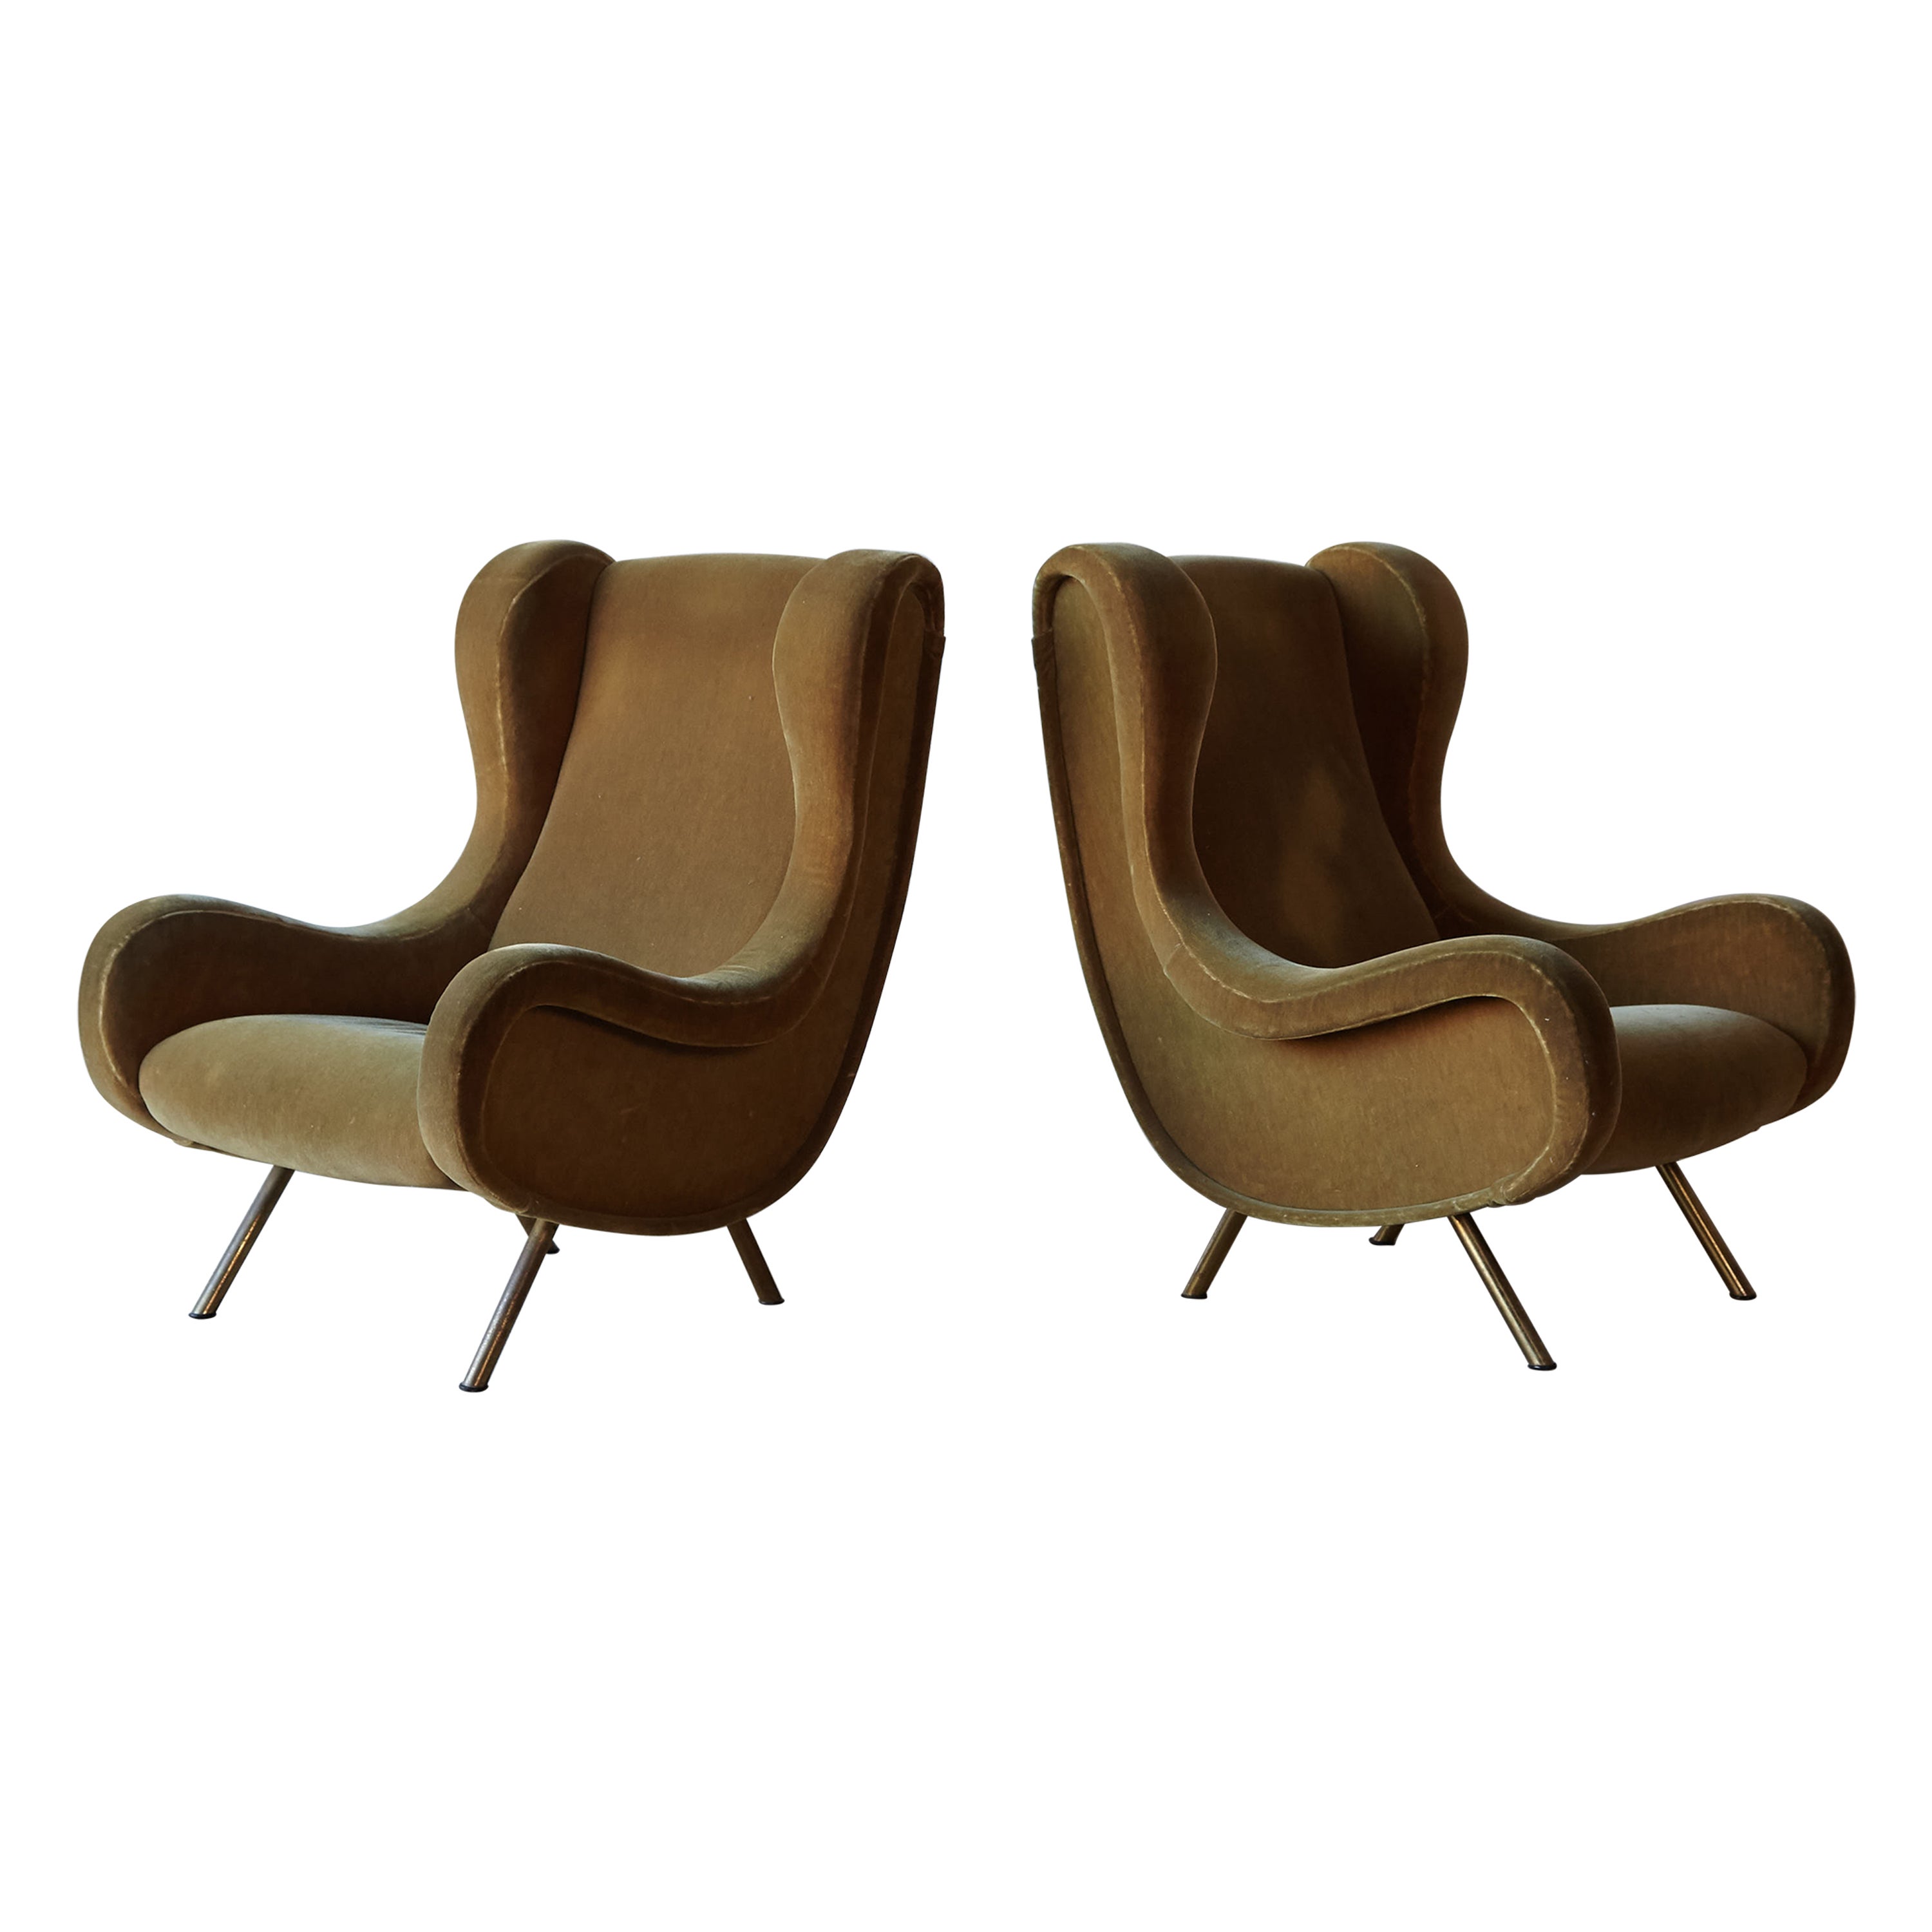 Pair of Marco Zanuso Senior Chairs, Arflex, France, 1960s for Reupholstery